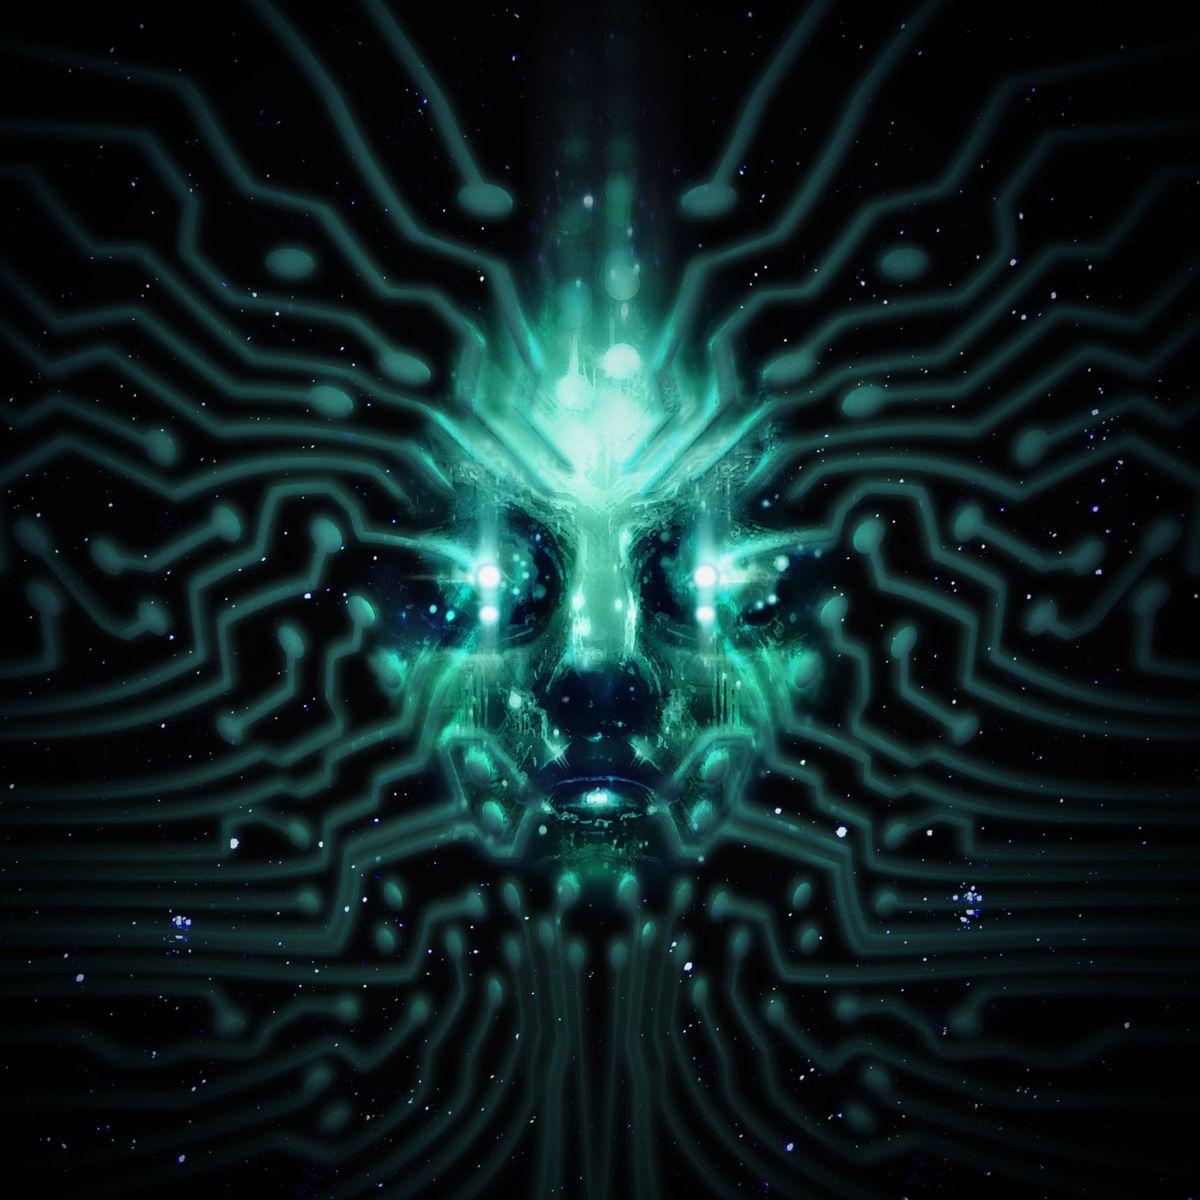 SHODAN, the evil AI in the System Shock remake, displayed as a series of digital pathways across an entire image